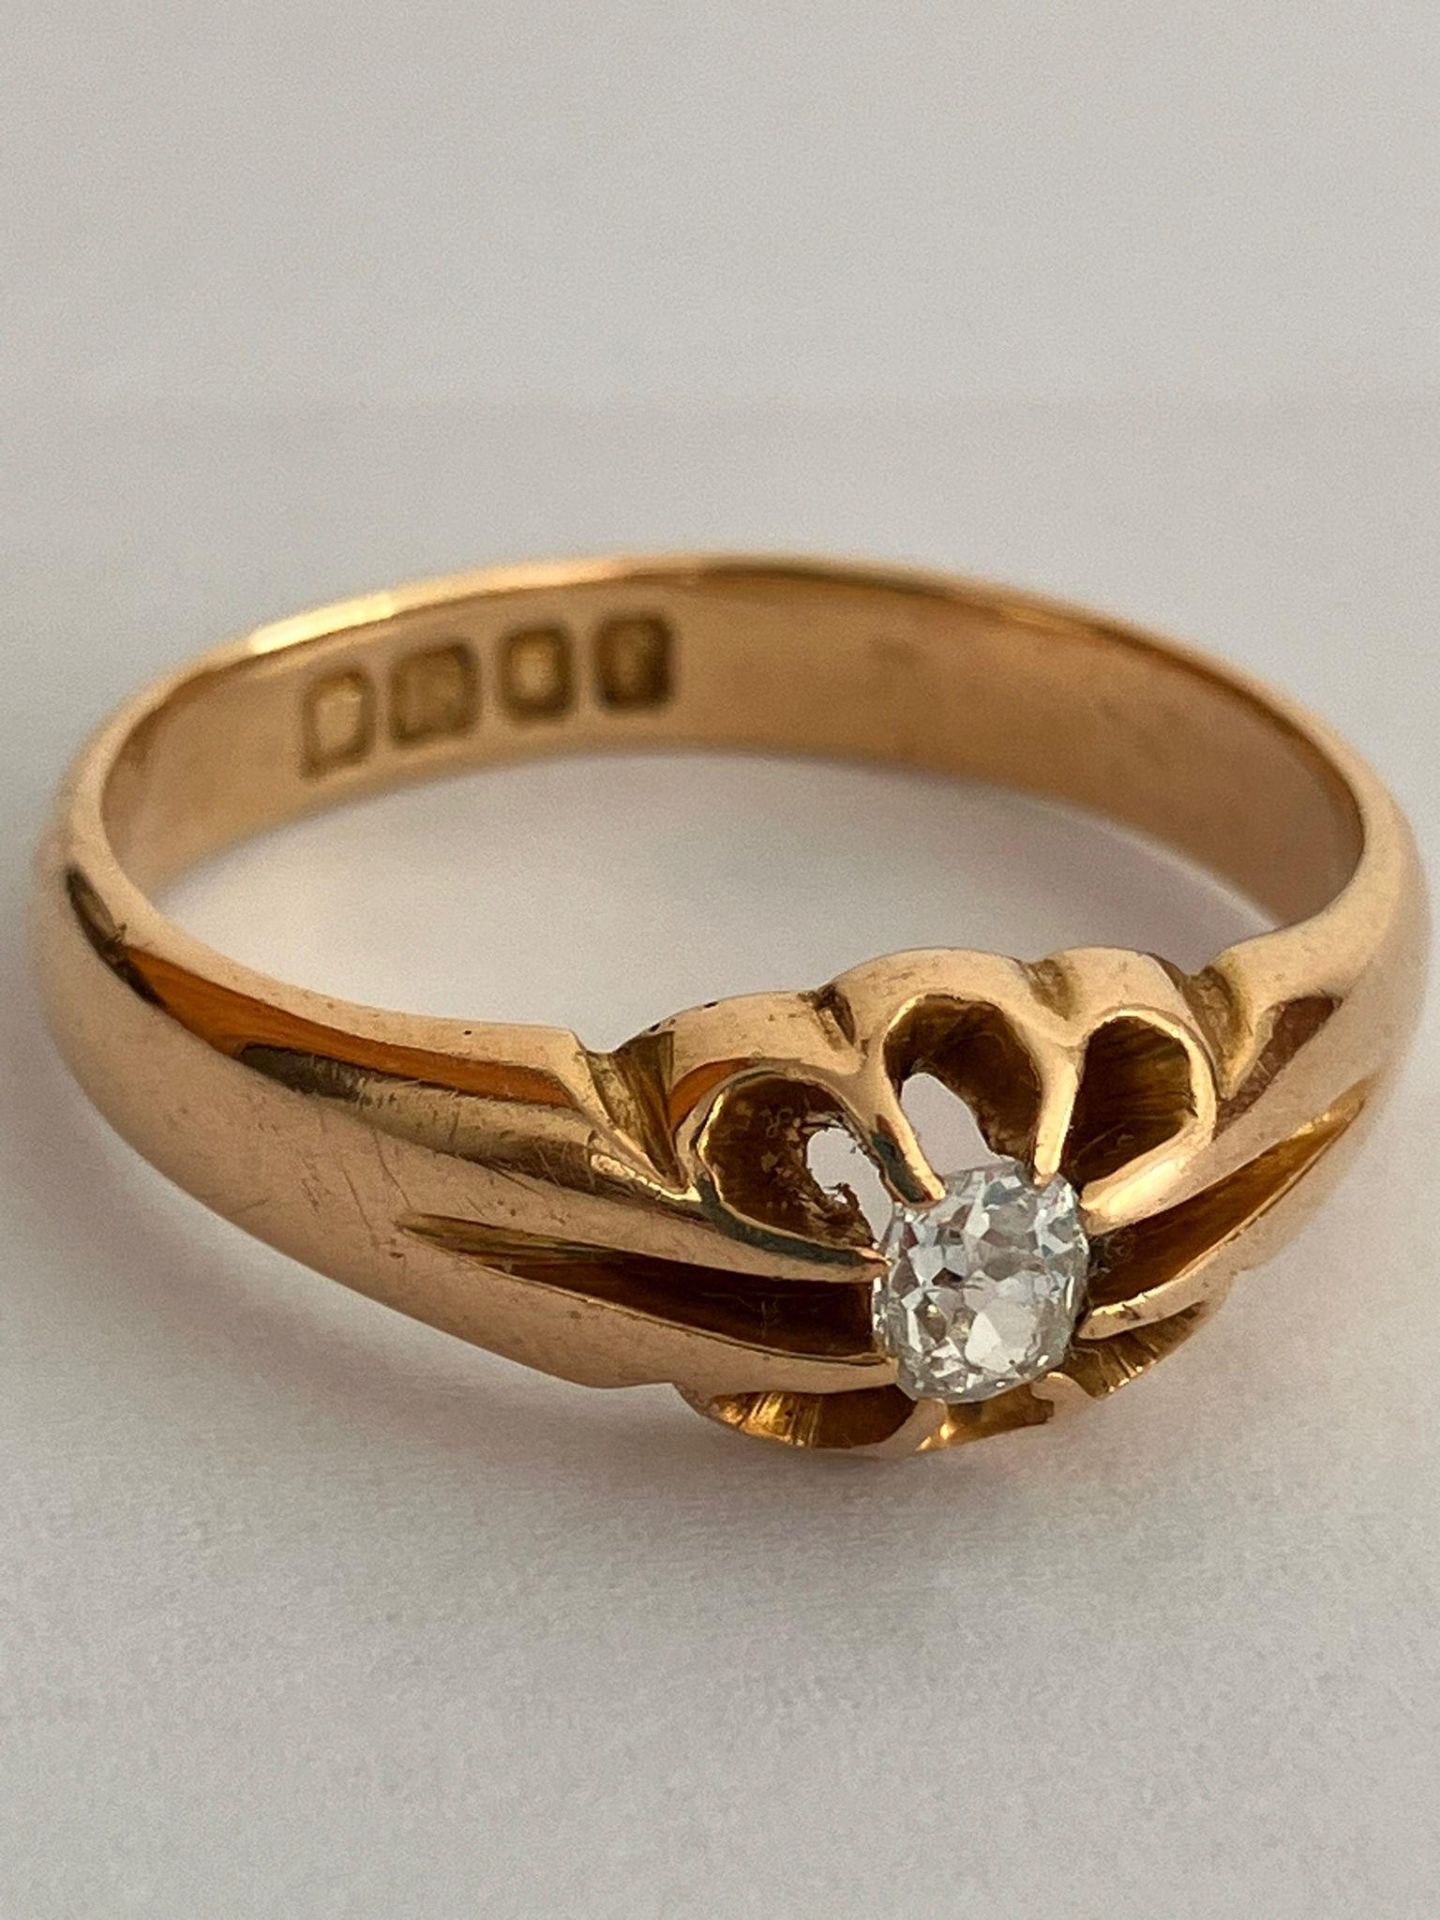 Antique 18 carat GOLD, DIAMOND SOLITAIRE GYPSY/ PINKIE RING. Having a clear white beautifully cut - Bild 2 aus 3